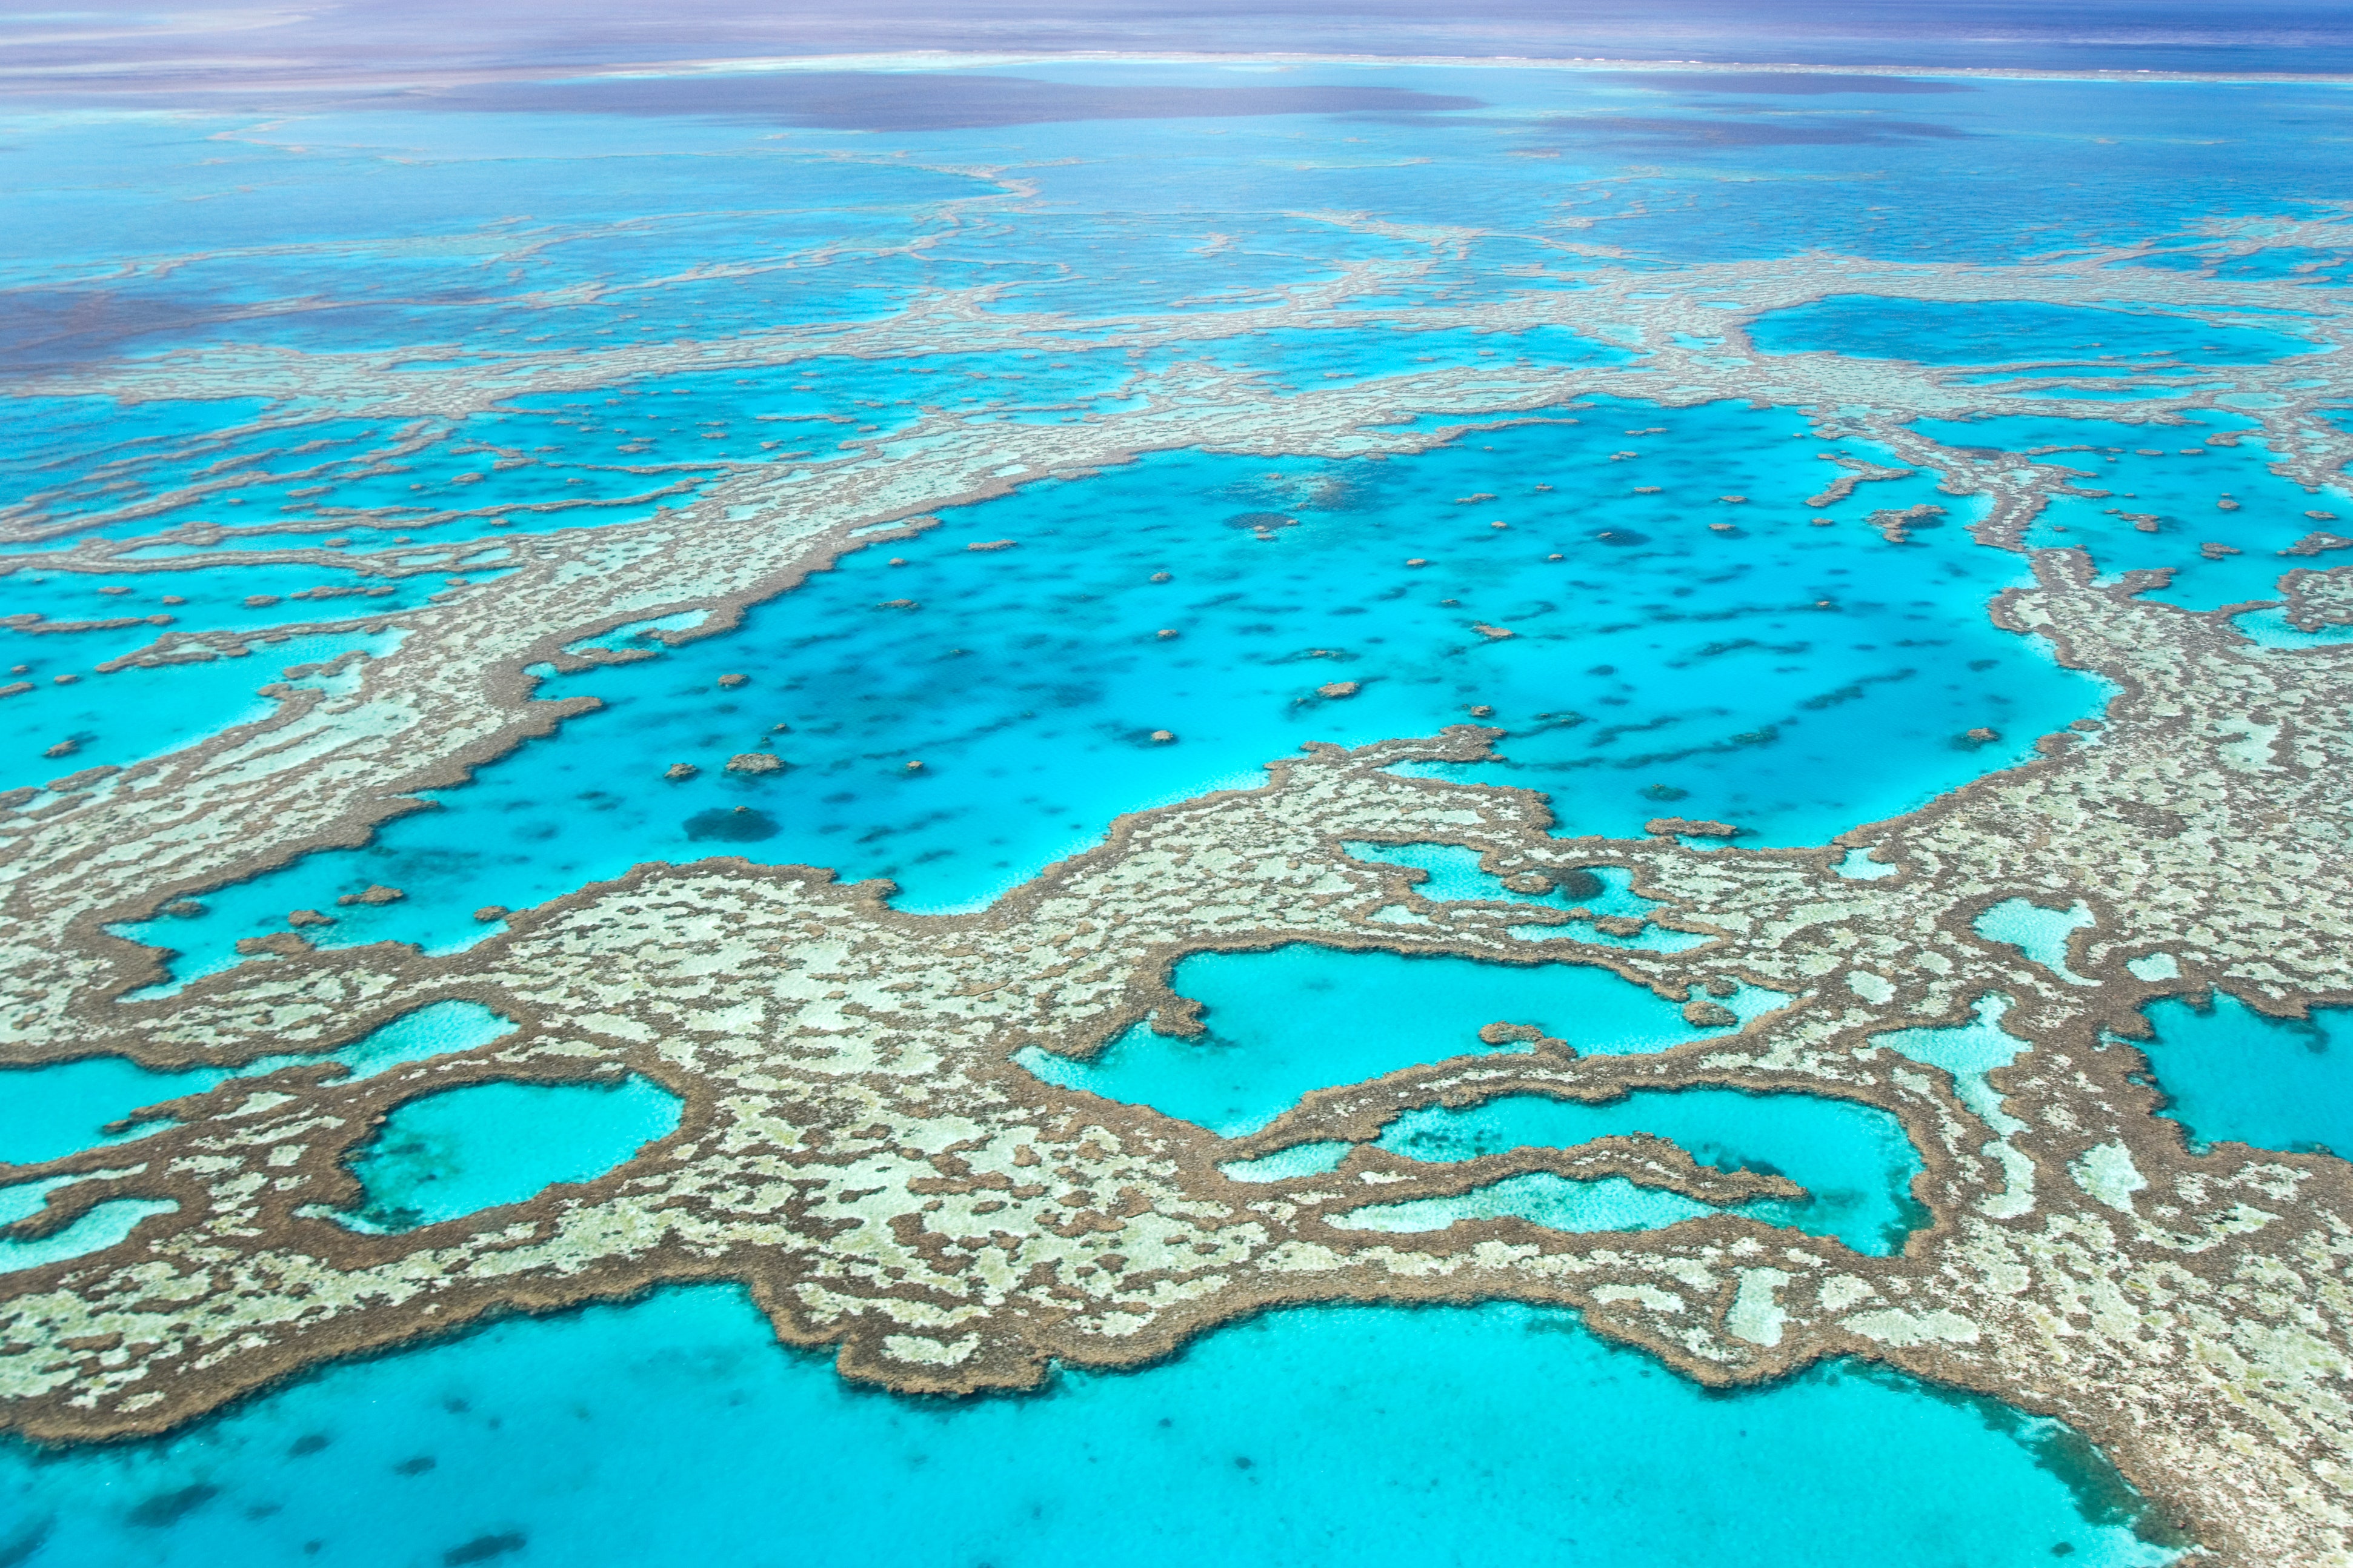 <p>Although the Great Barrier Reef—the largest living thing on Earth—can be seen from space, the best vantage point belongs to the avid snorkelers and scuba divers who visit each year. If you must resurface, do it at the <a href="https://www.cntraveler.com/story/all-the-new-places-to-stay-in-australias-whitsunday-islands?mbid=synd_msn_rss&utm_source=msn&utm_medium=syndication">Whitsundays</a>—namely Whitehaven Beach, often considered to be one of the world's most beautiful beaches.</p> <p><strong>Date of Inscription:</strong> 1981</p><p>Sign up to receive the latest news, expert tips, and inspiration on all things travel</p><a href="https://www.cntraveler.com/newsletter/the-daily?sourceCode=msnsend">Inspire Me</a>